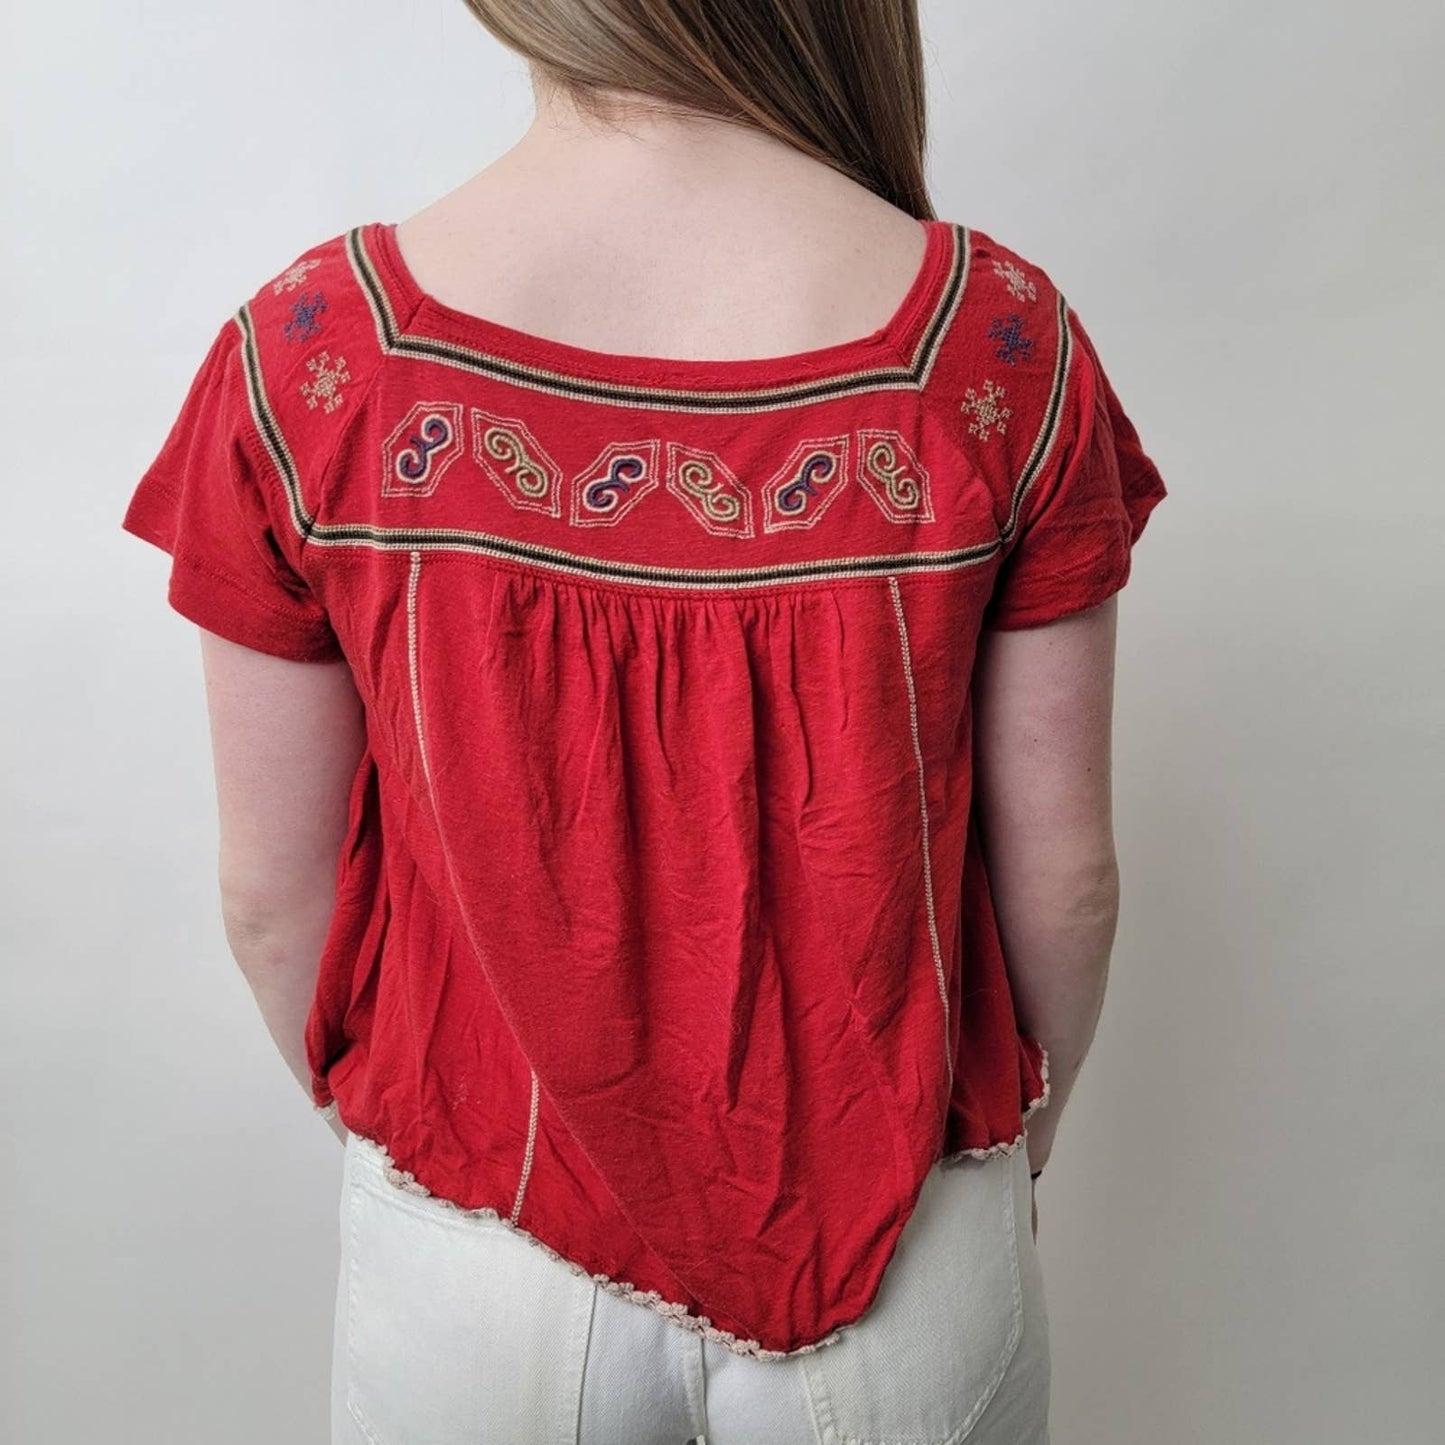 Free People Muse Short Sleeve Flowy Boho Crop Top Tunic Blouse